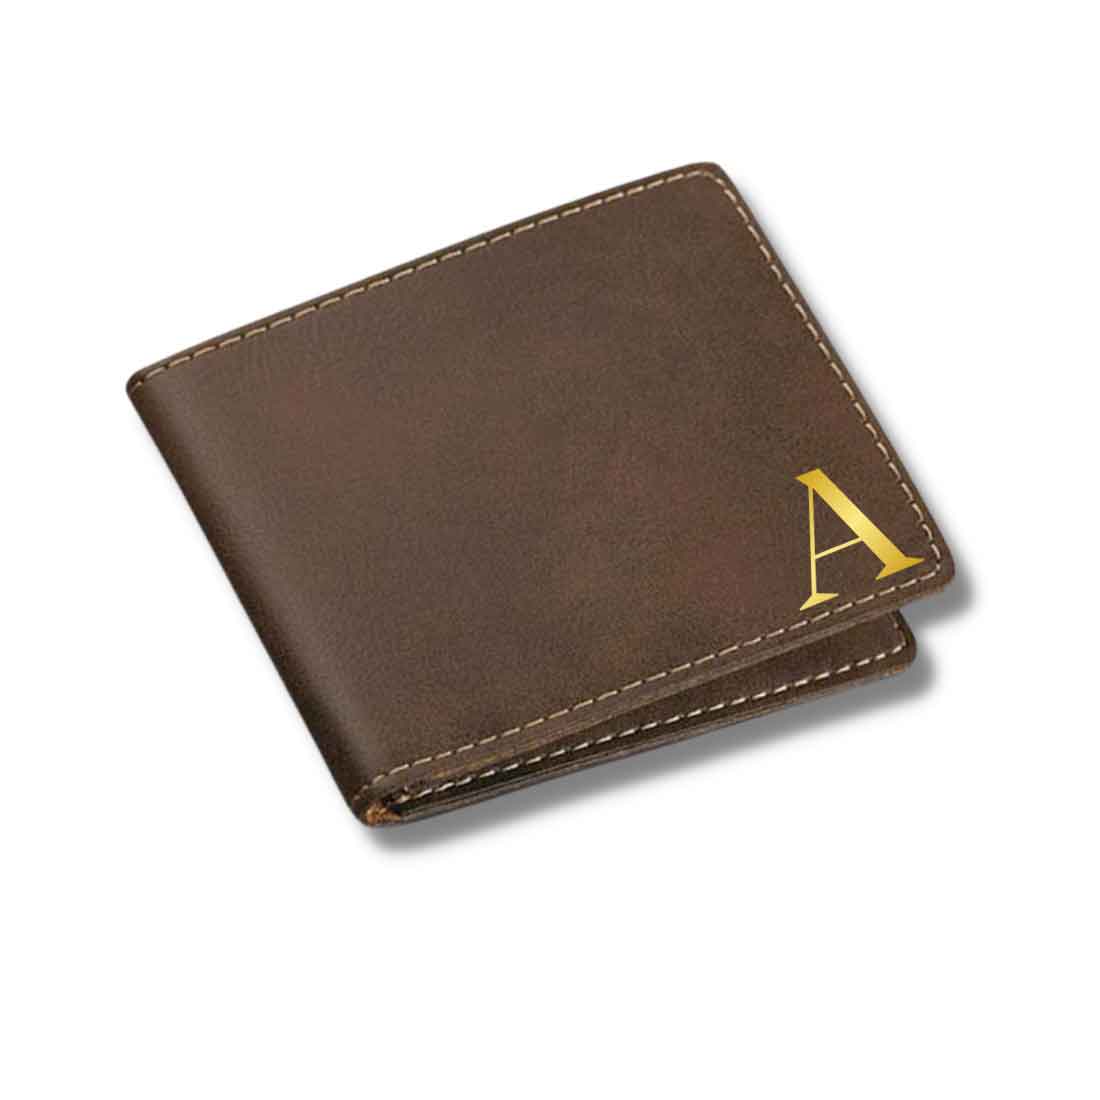 Customized Wallets for Him Faux Leather Gents Purse - Monogram Nutcase